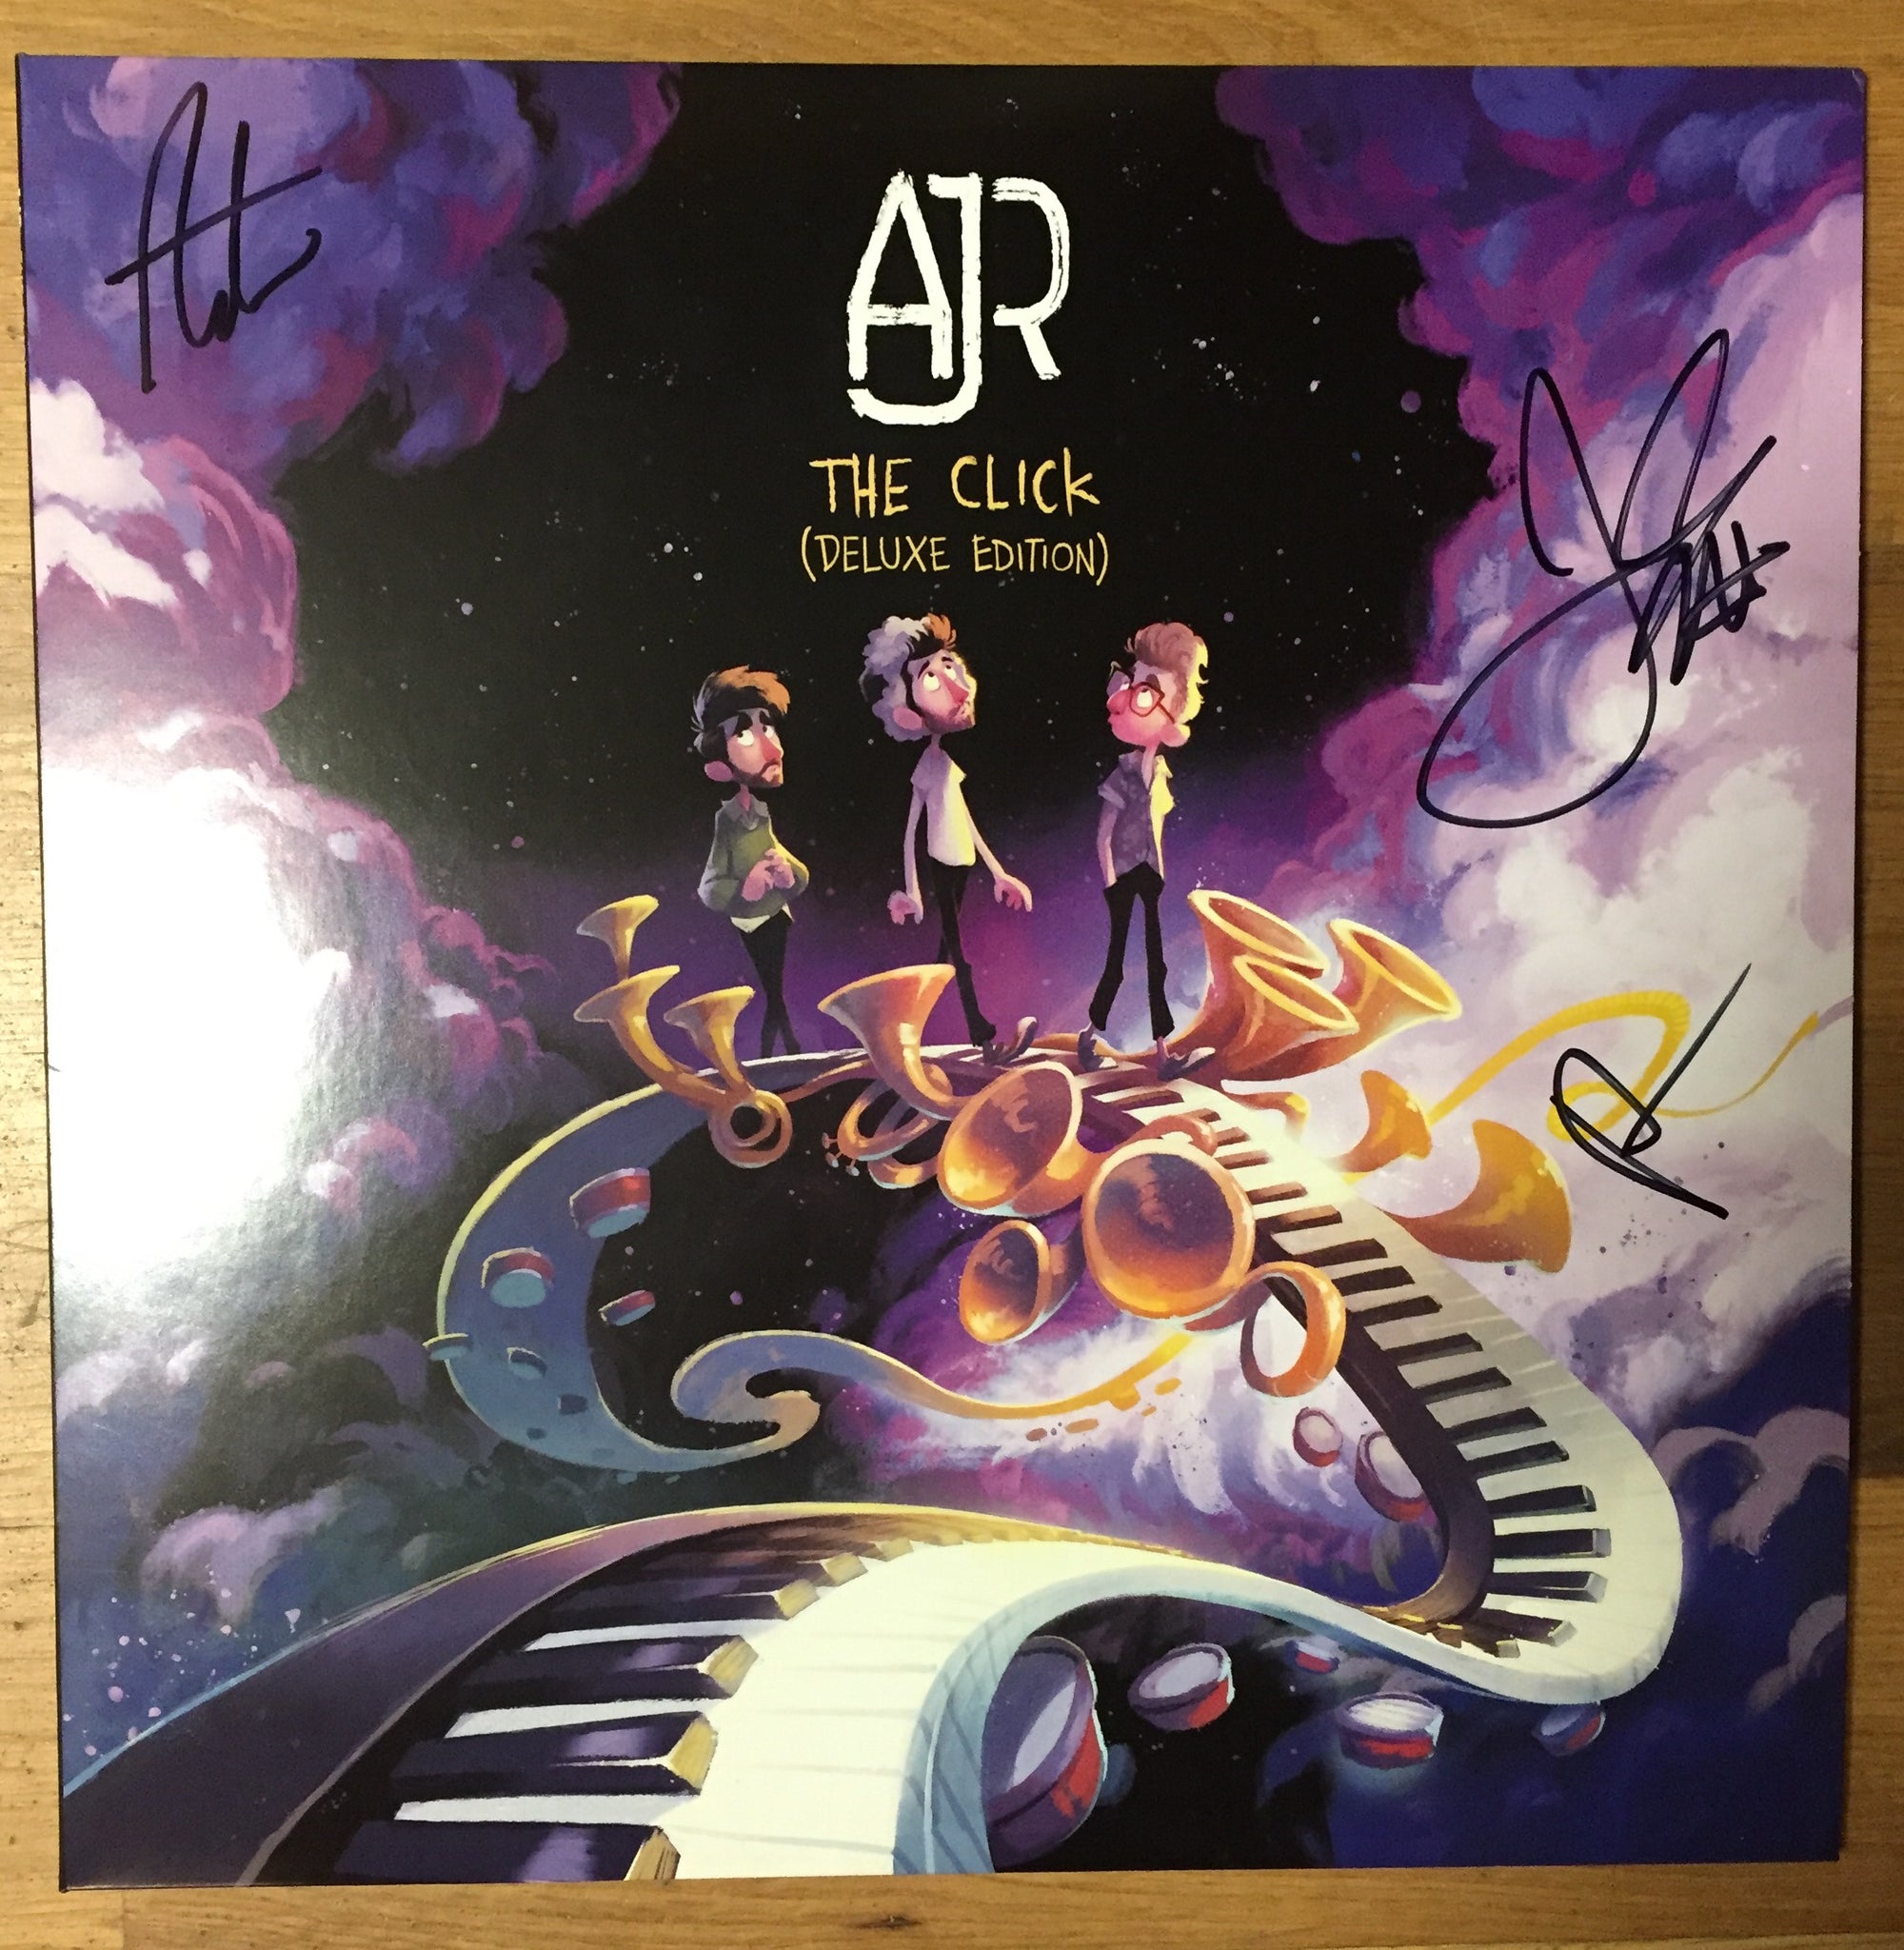 AJR - The Click (Autographed by Band!) - New Vinyl Lp 2018 BMG Deluxe Edition with Bonus 7" Single - Electro Pop